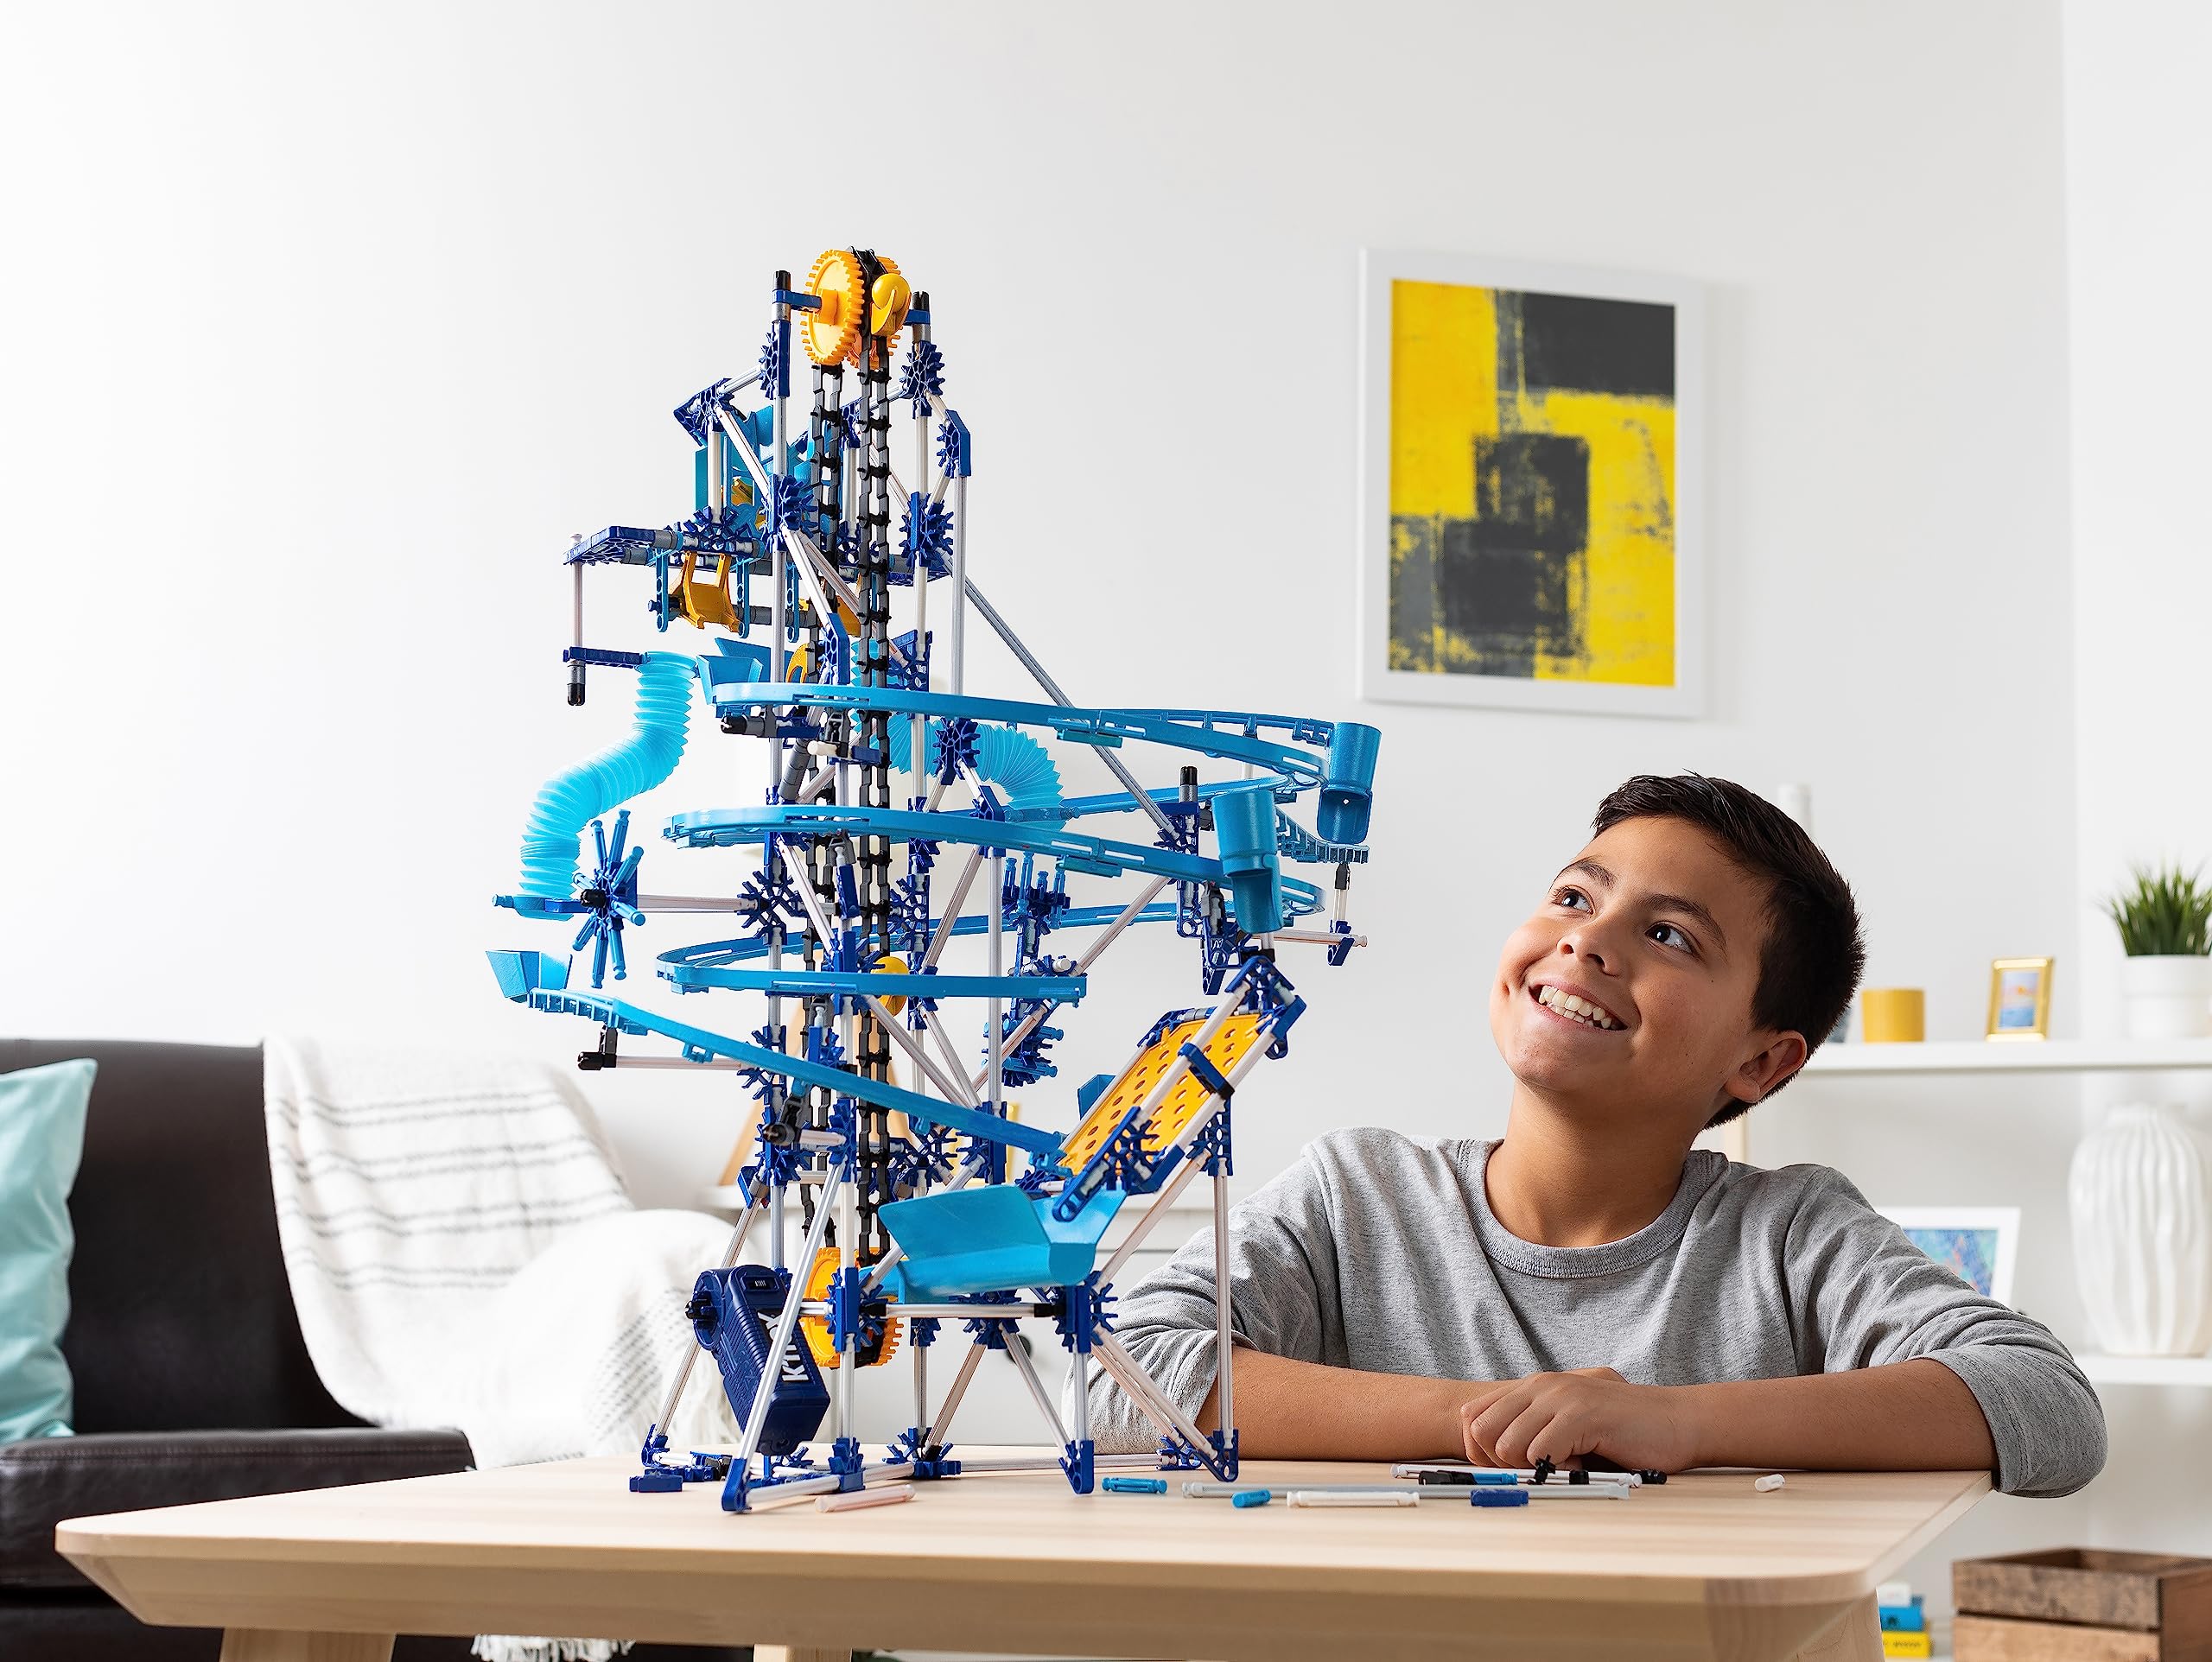 K'NEX Marble Coaster Run with Motor Set, 504 Piece Marble Maze Game Building Toy for Kids, Stem Learning Toy for Boy Girl Age 8+, 3 Different Builds for Skills